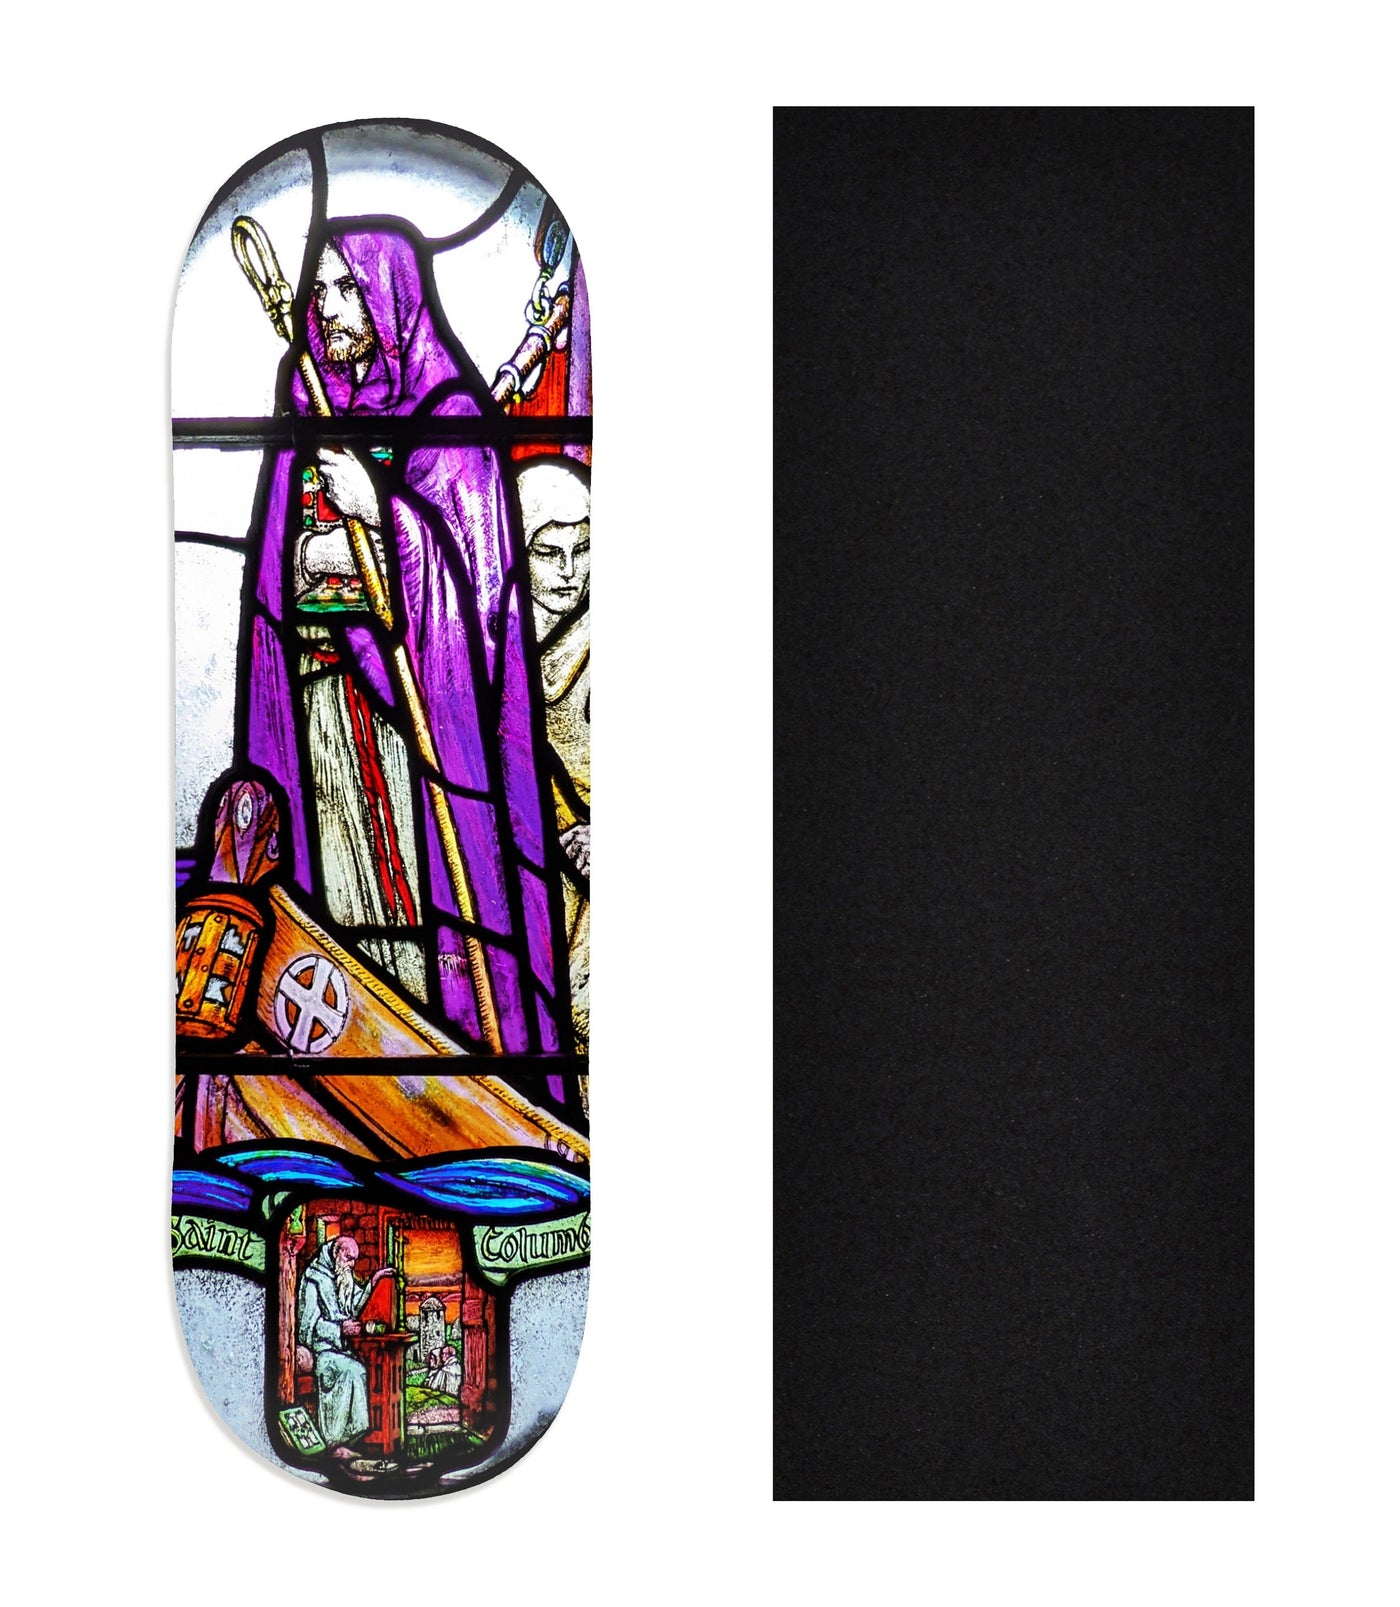 Teak Tuning Heat Transfer Graphic Wooden Fingerboard Deck, "St. Columba Stained Glass" 29mm Deck